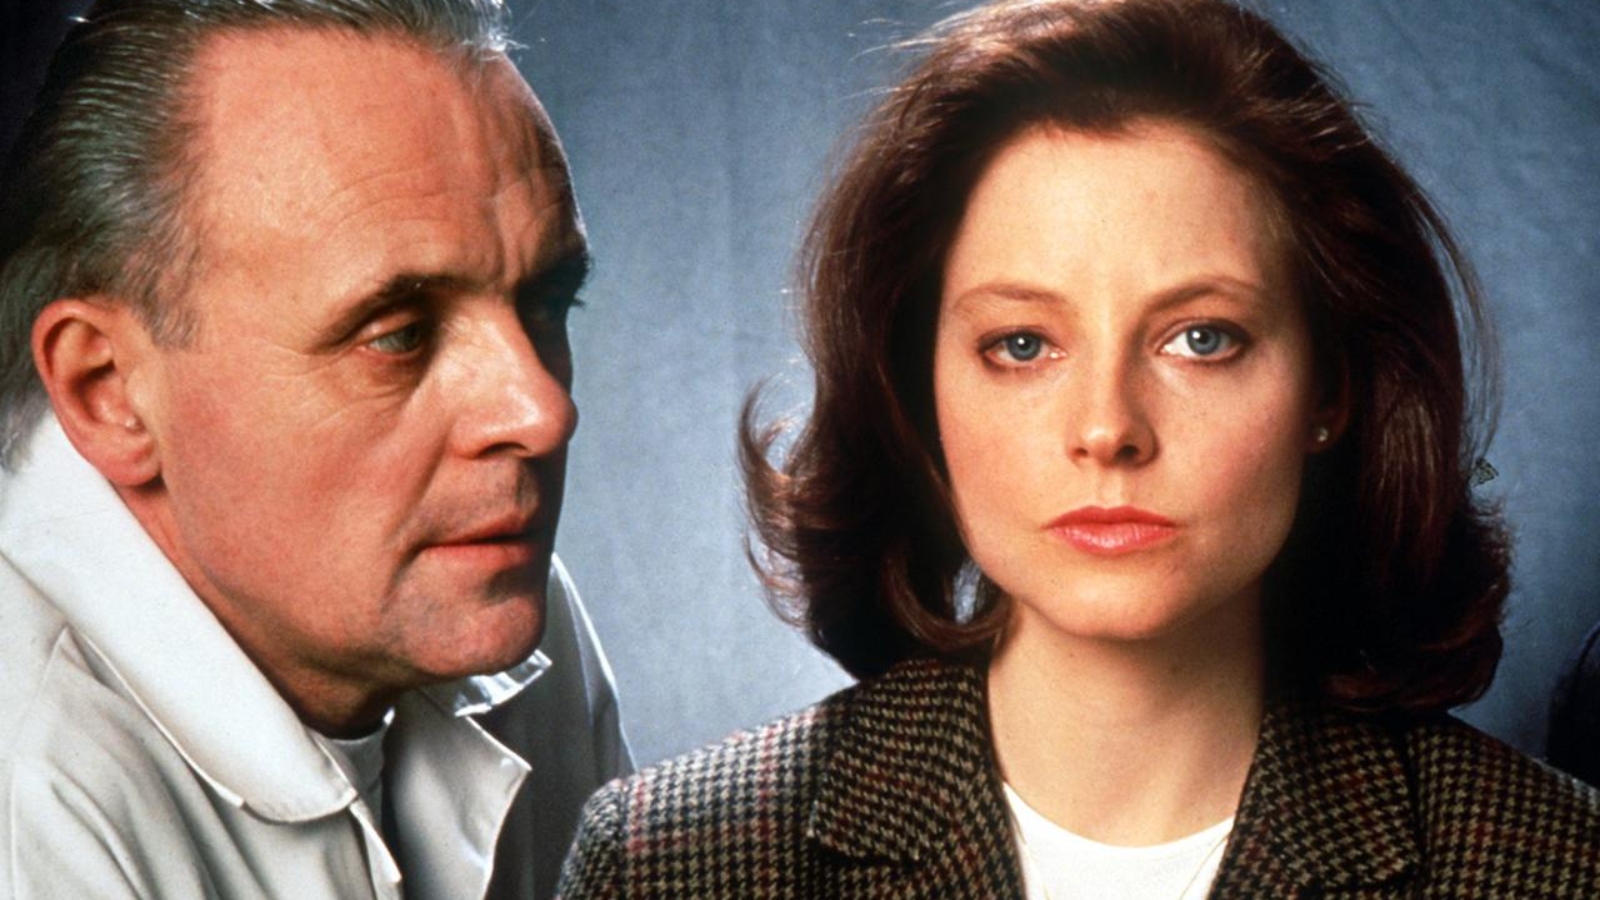 Anthony Hopkins as Hannibal Lecter and Jodie Foster as Clarice Starling